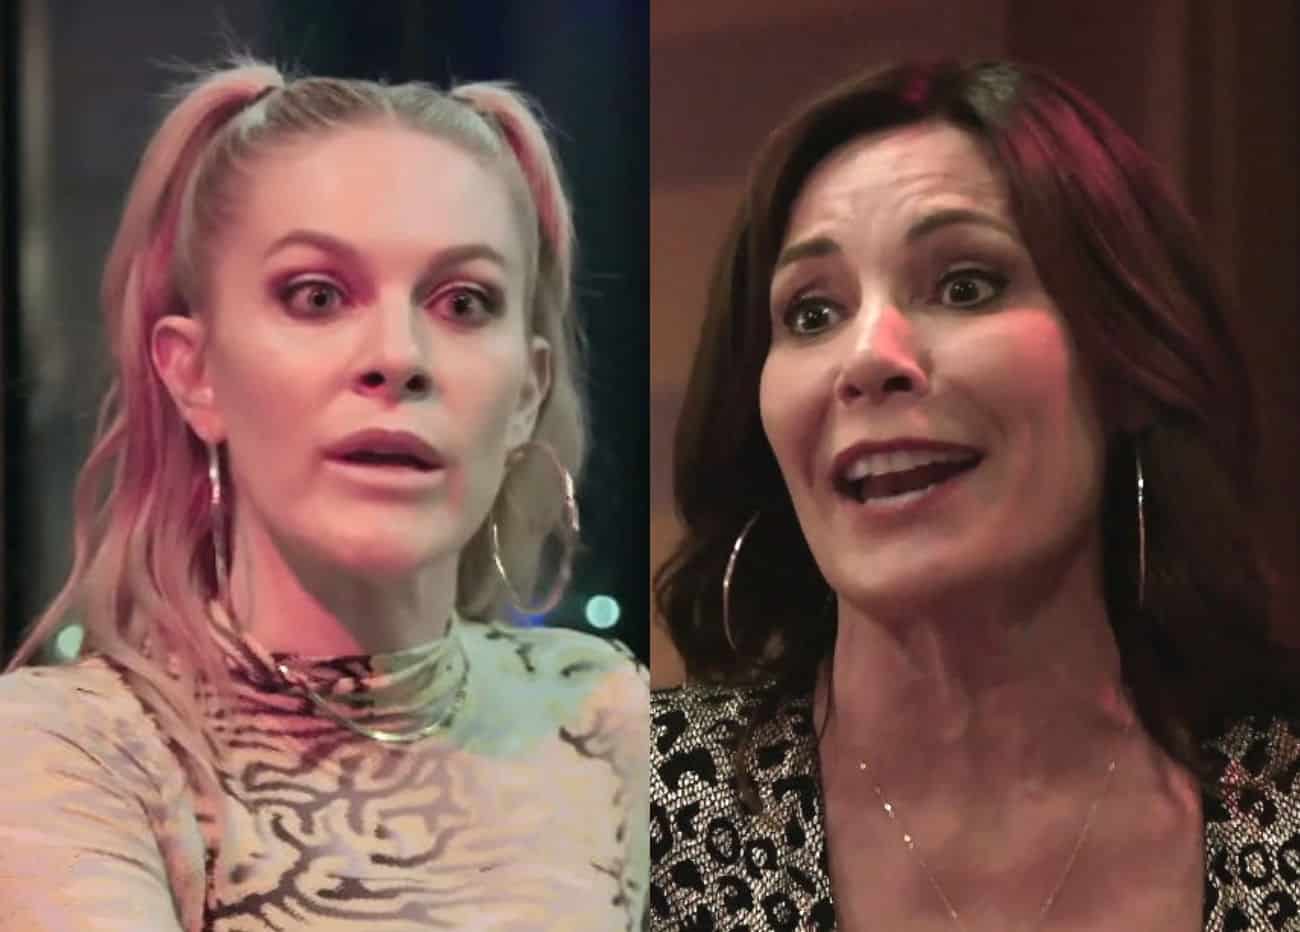 RHONY Recap- Leah Argues With Luann Over Rights and Proceeds of Holiday Song, Eboni Connects With Her Potential Sister, Plus Ramona and Sonja Celebrate Their Birthday 